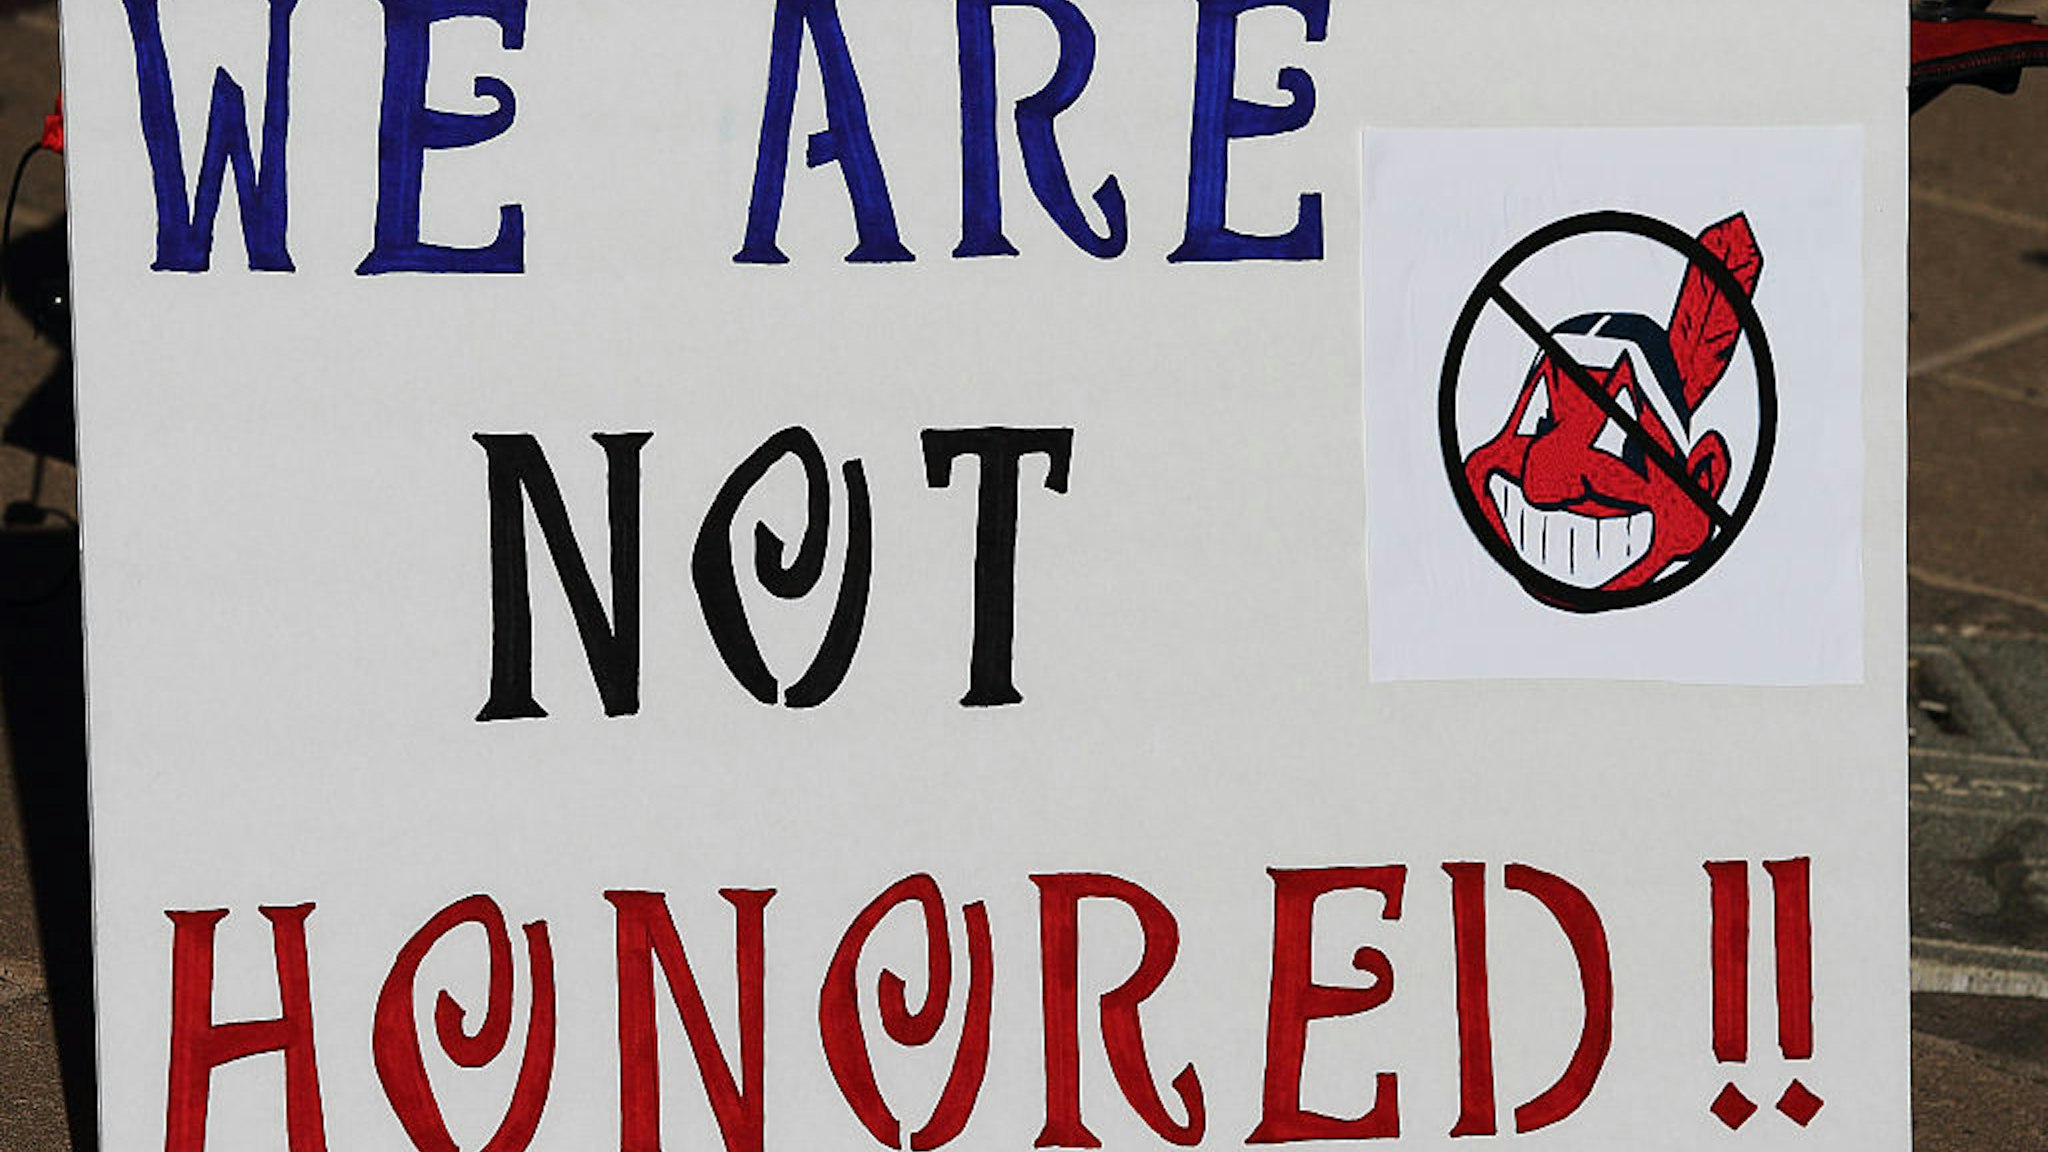 Jun 25, 2014: Native Americans protest the use of the Chief Wahoo mascot by the Cleveland Indians Major League Baseball team outside a regular season game between the Cleveland Indians and the Arizona Diamondbacks at Chase Field.